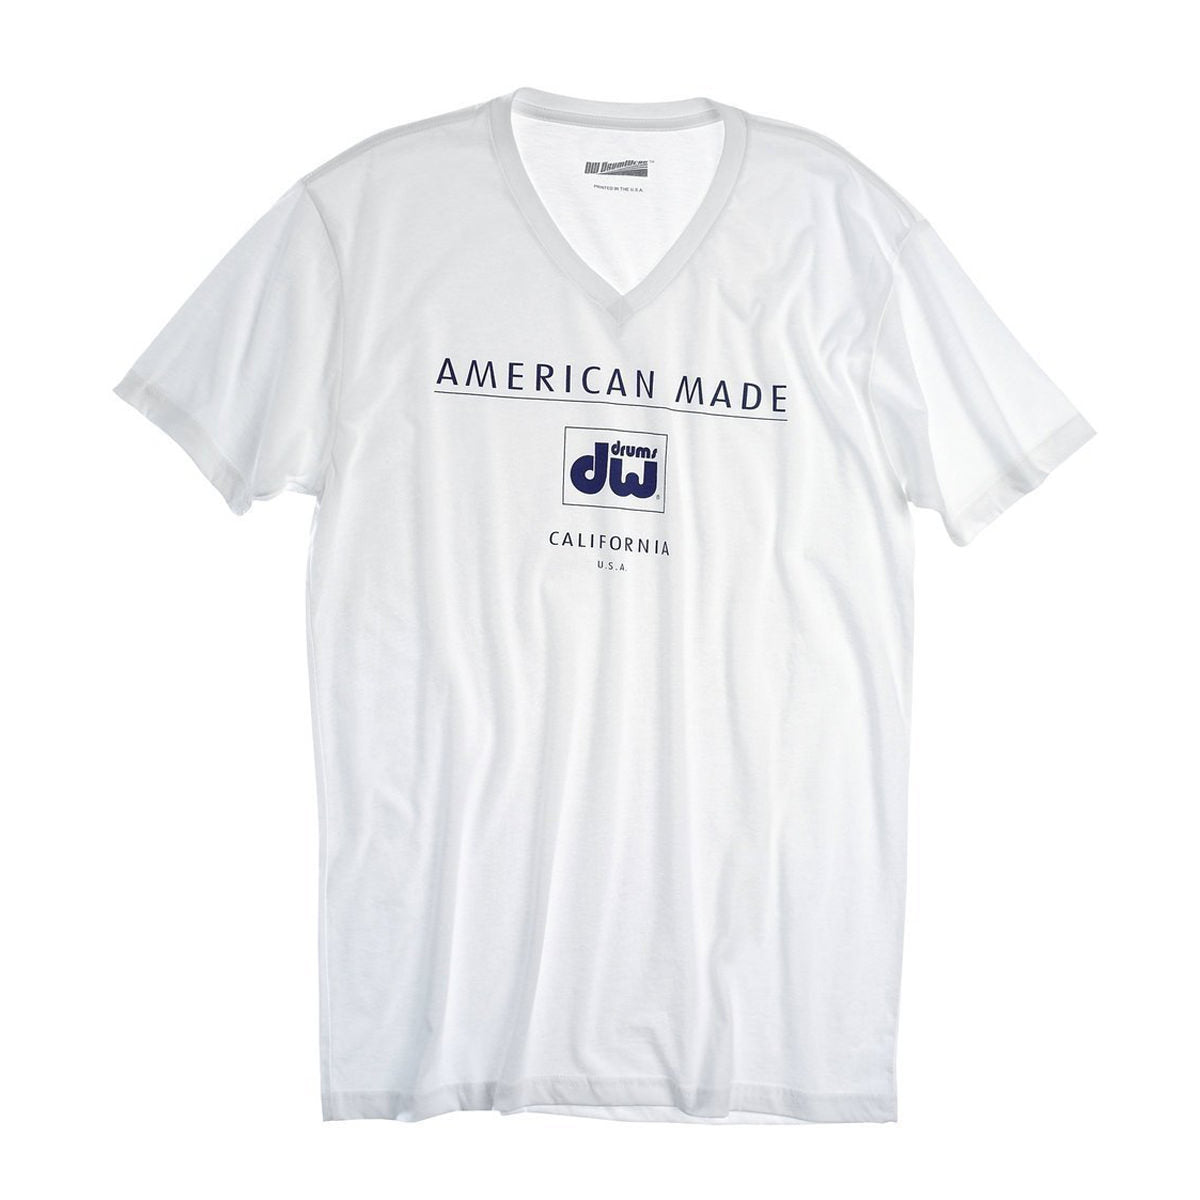 DW American Made T-Shirt - Large